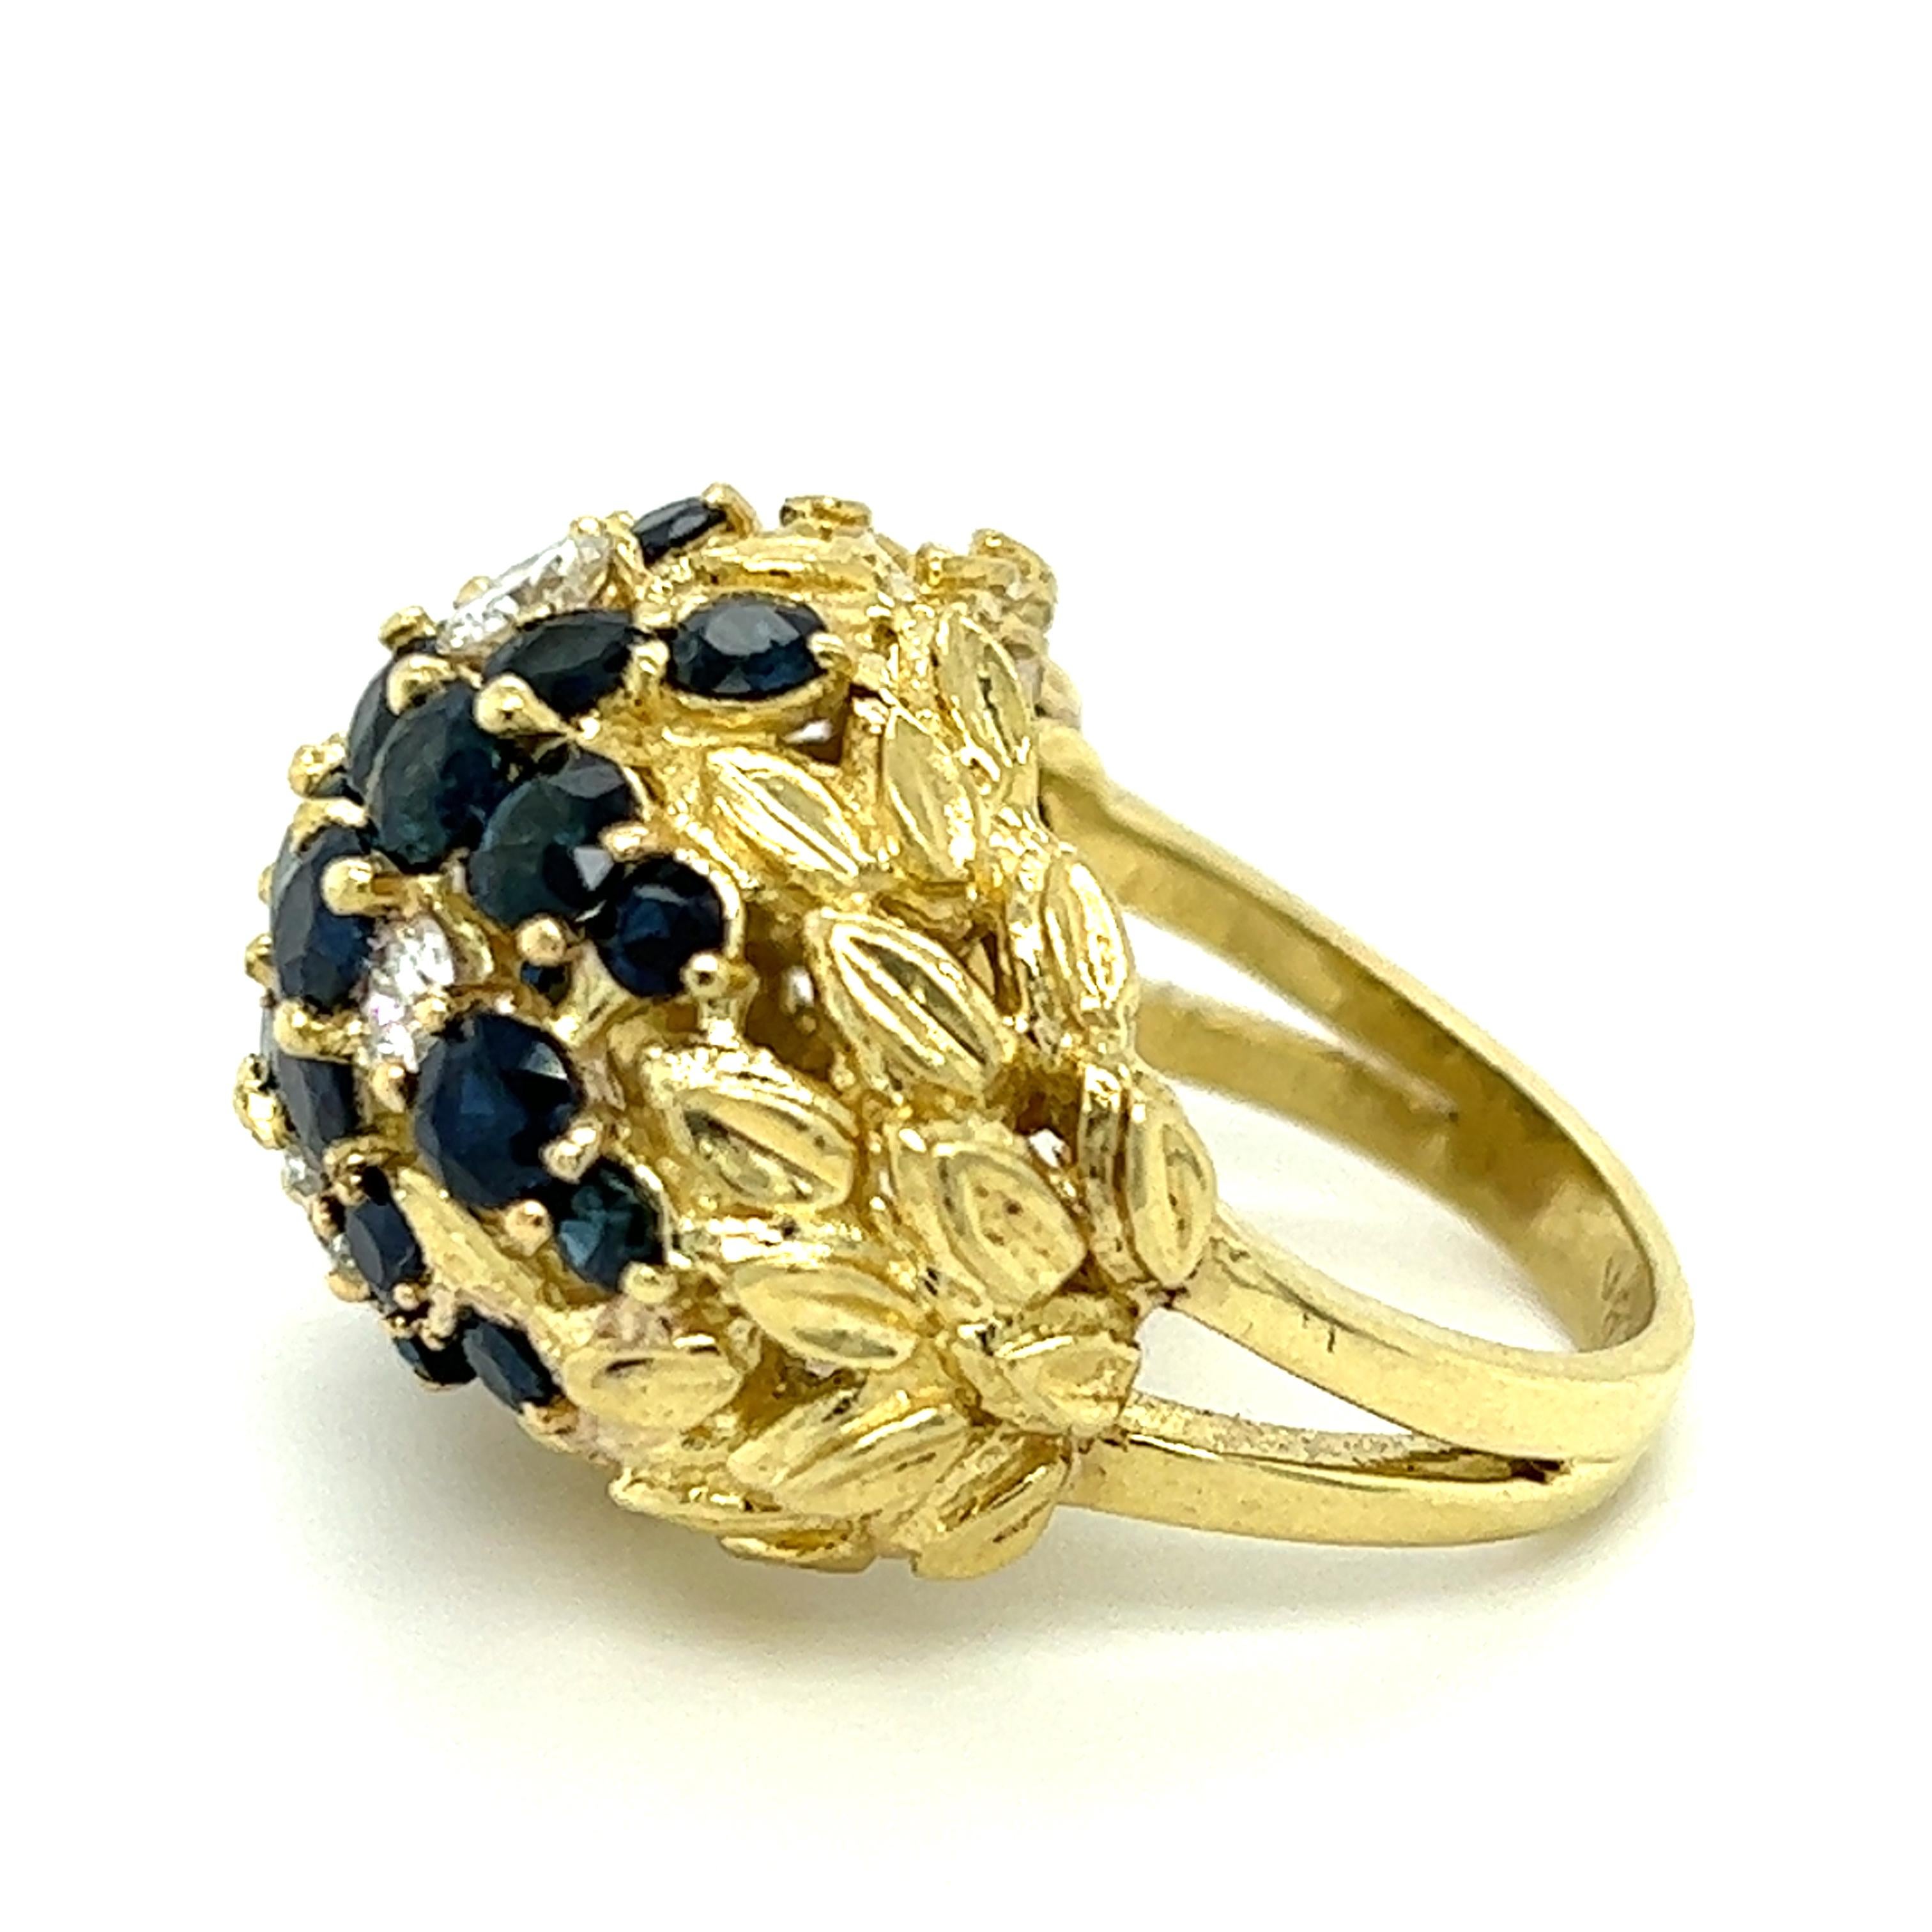 One 18 karat yellow gold (stamped 18K) carved flower design dome ring set with four (4) modern round brilliant cut diamonds, approximately 0.70 carat total weight with matching I/J color and SI1 clarity and twenty-six (26) round natural dark blue